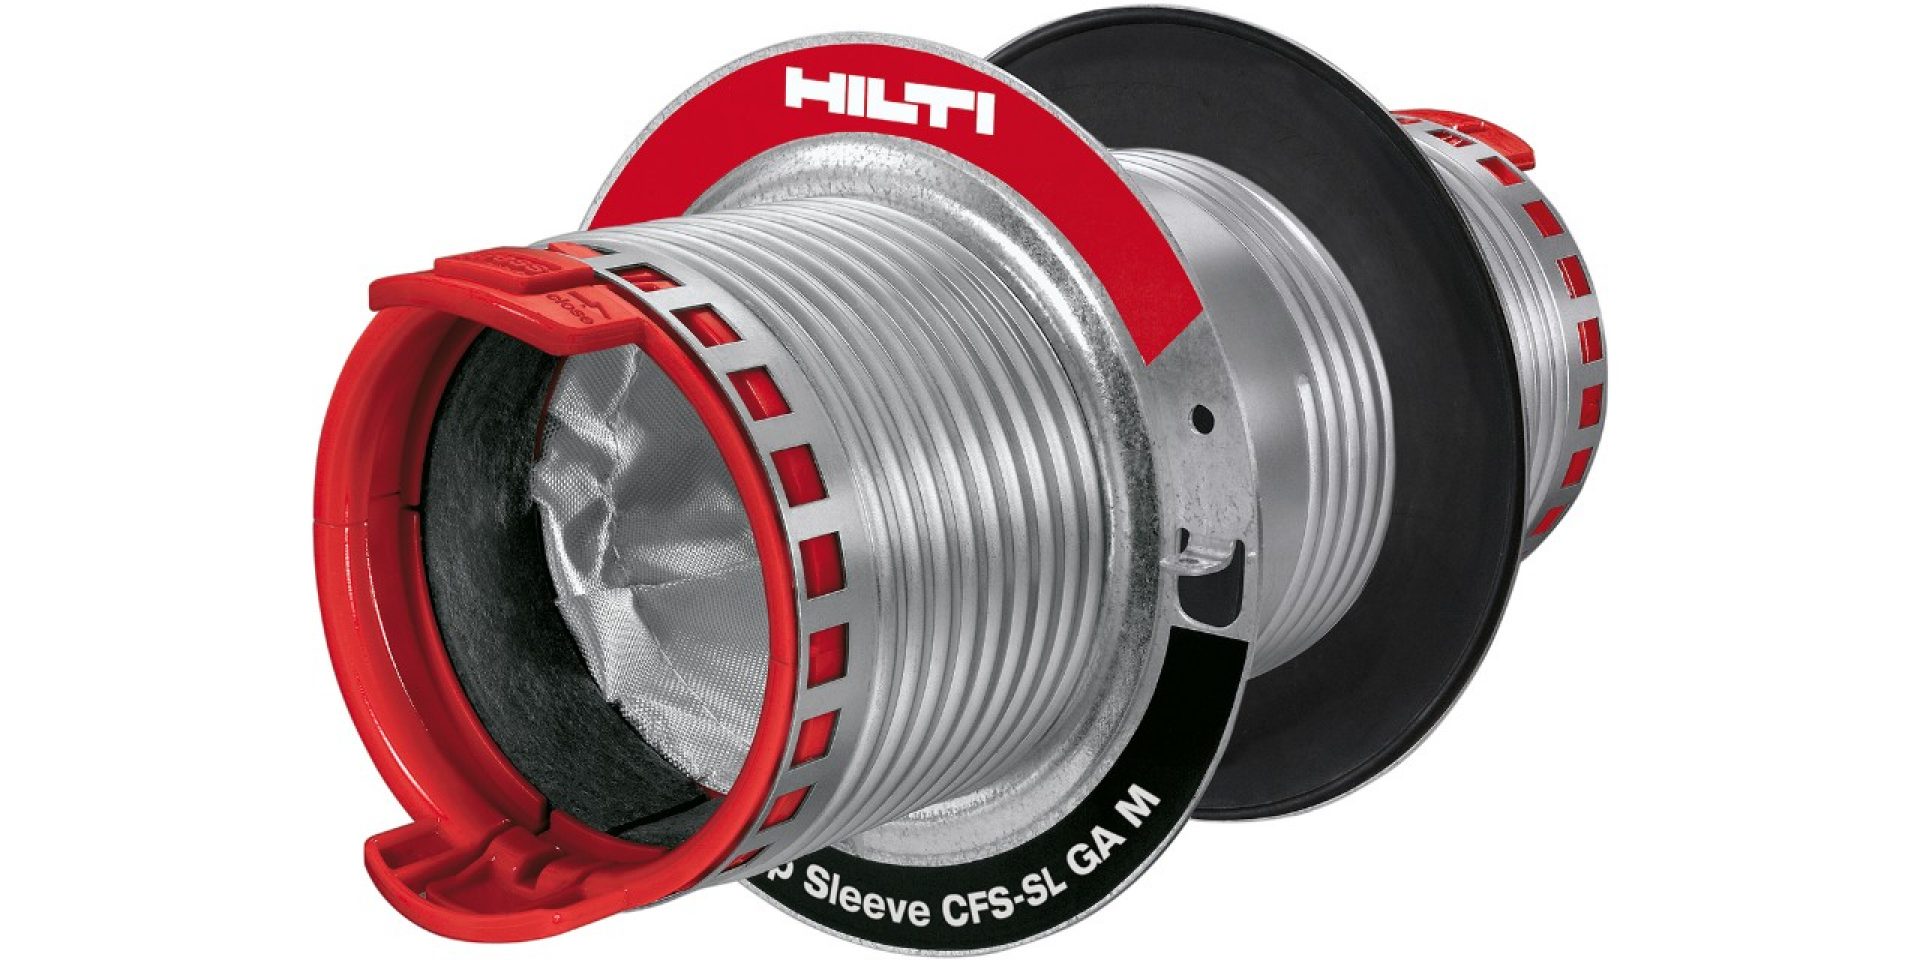 Hilti speed sleeve for data centers